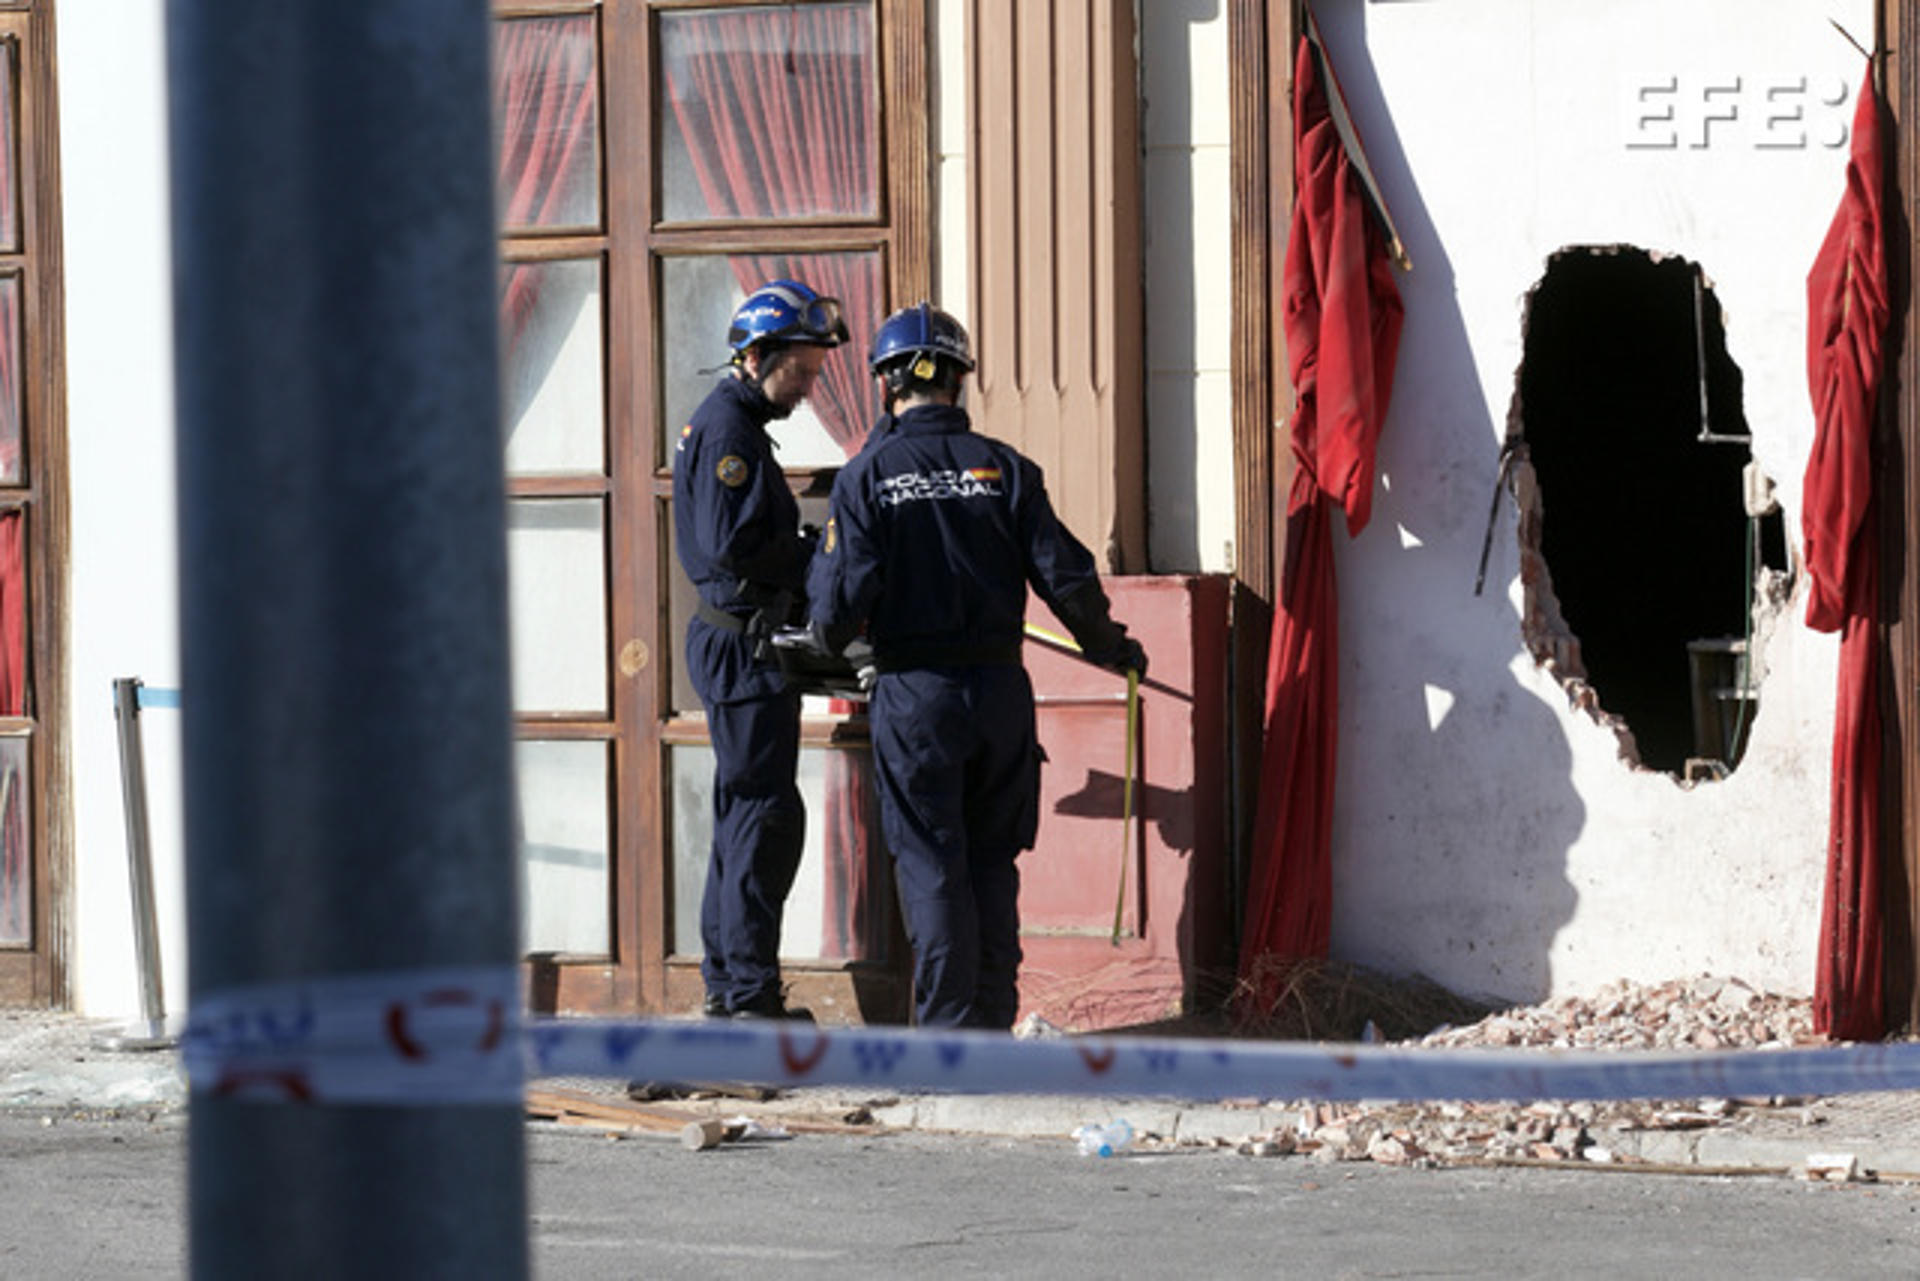 Judicial Police officers carry out an investigation at the premises of the Teatre and Fonda Milagros nightclubs in Murcia, south-eastern Spain, after the fire declared early on 01 October which cost the lives of thirteen people. EFE/Juan Carlos Caval
